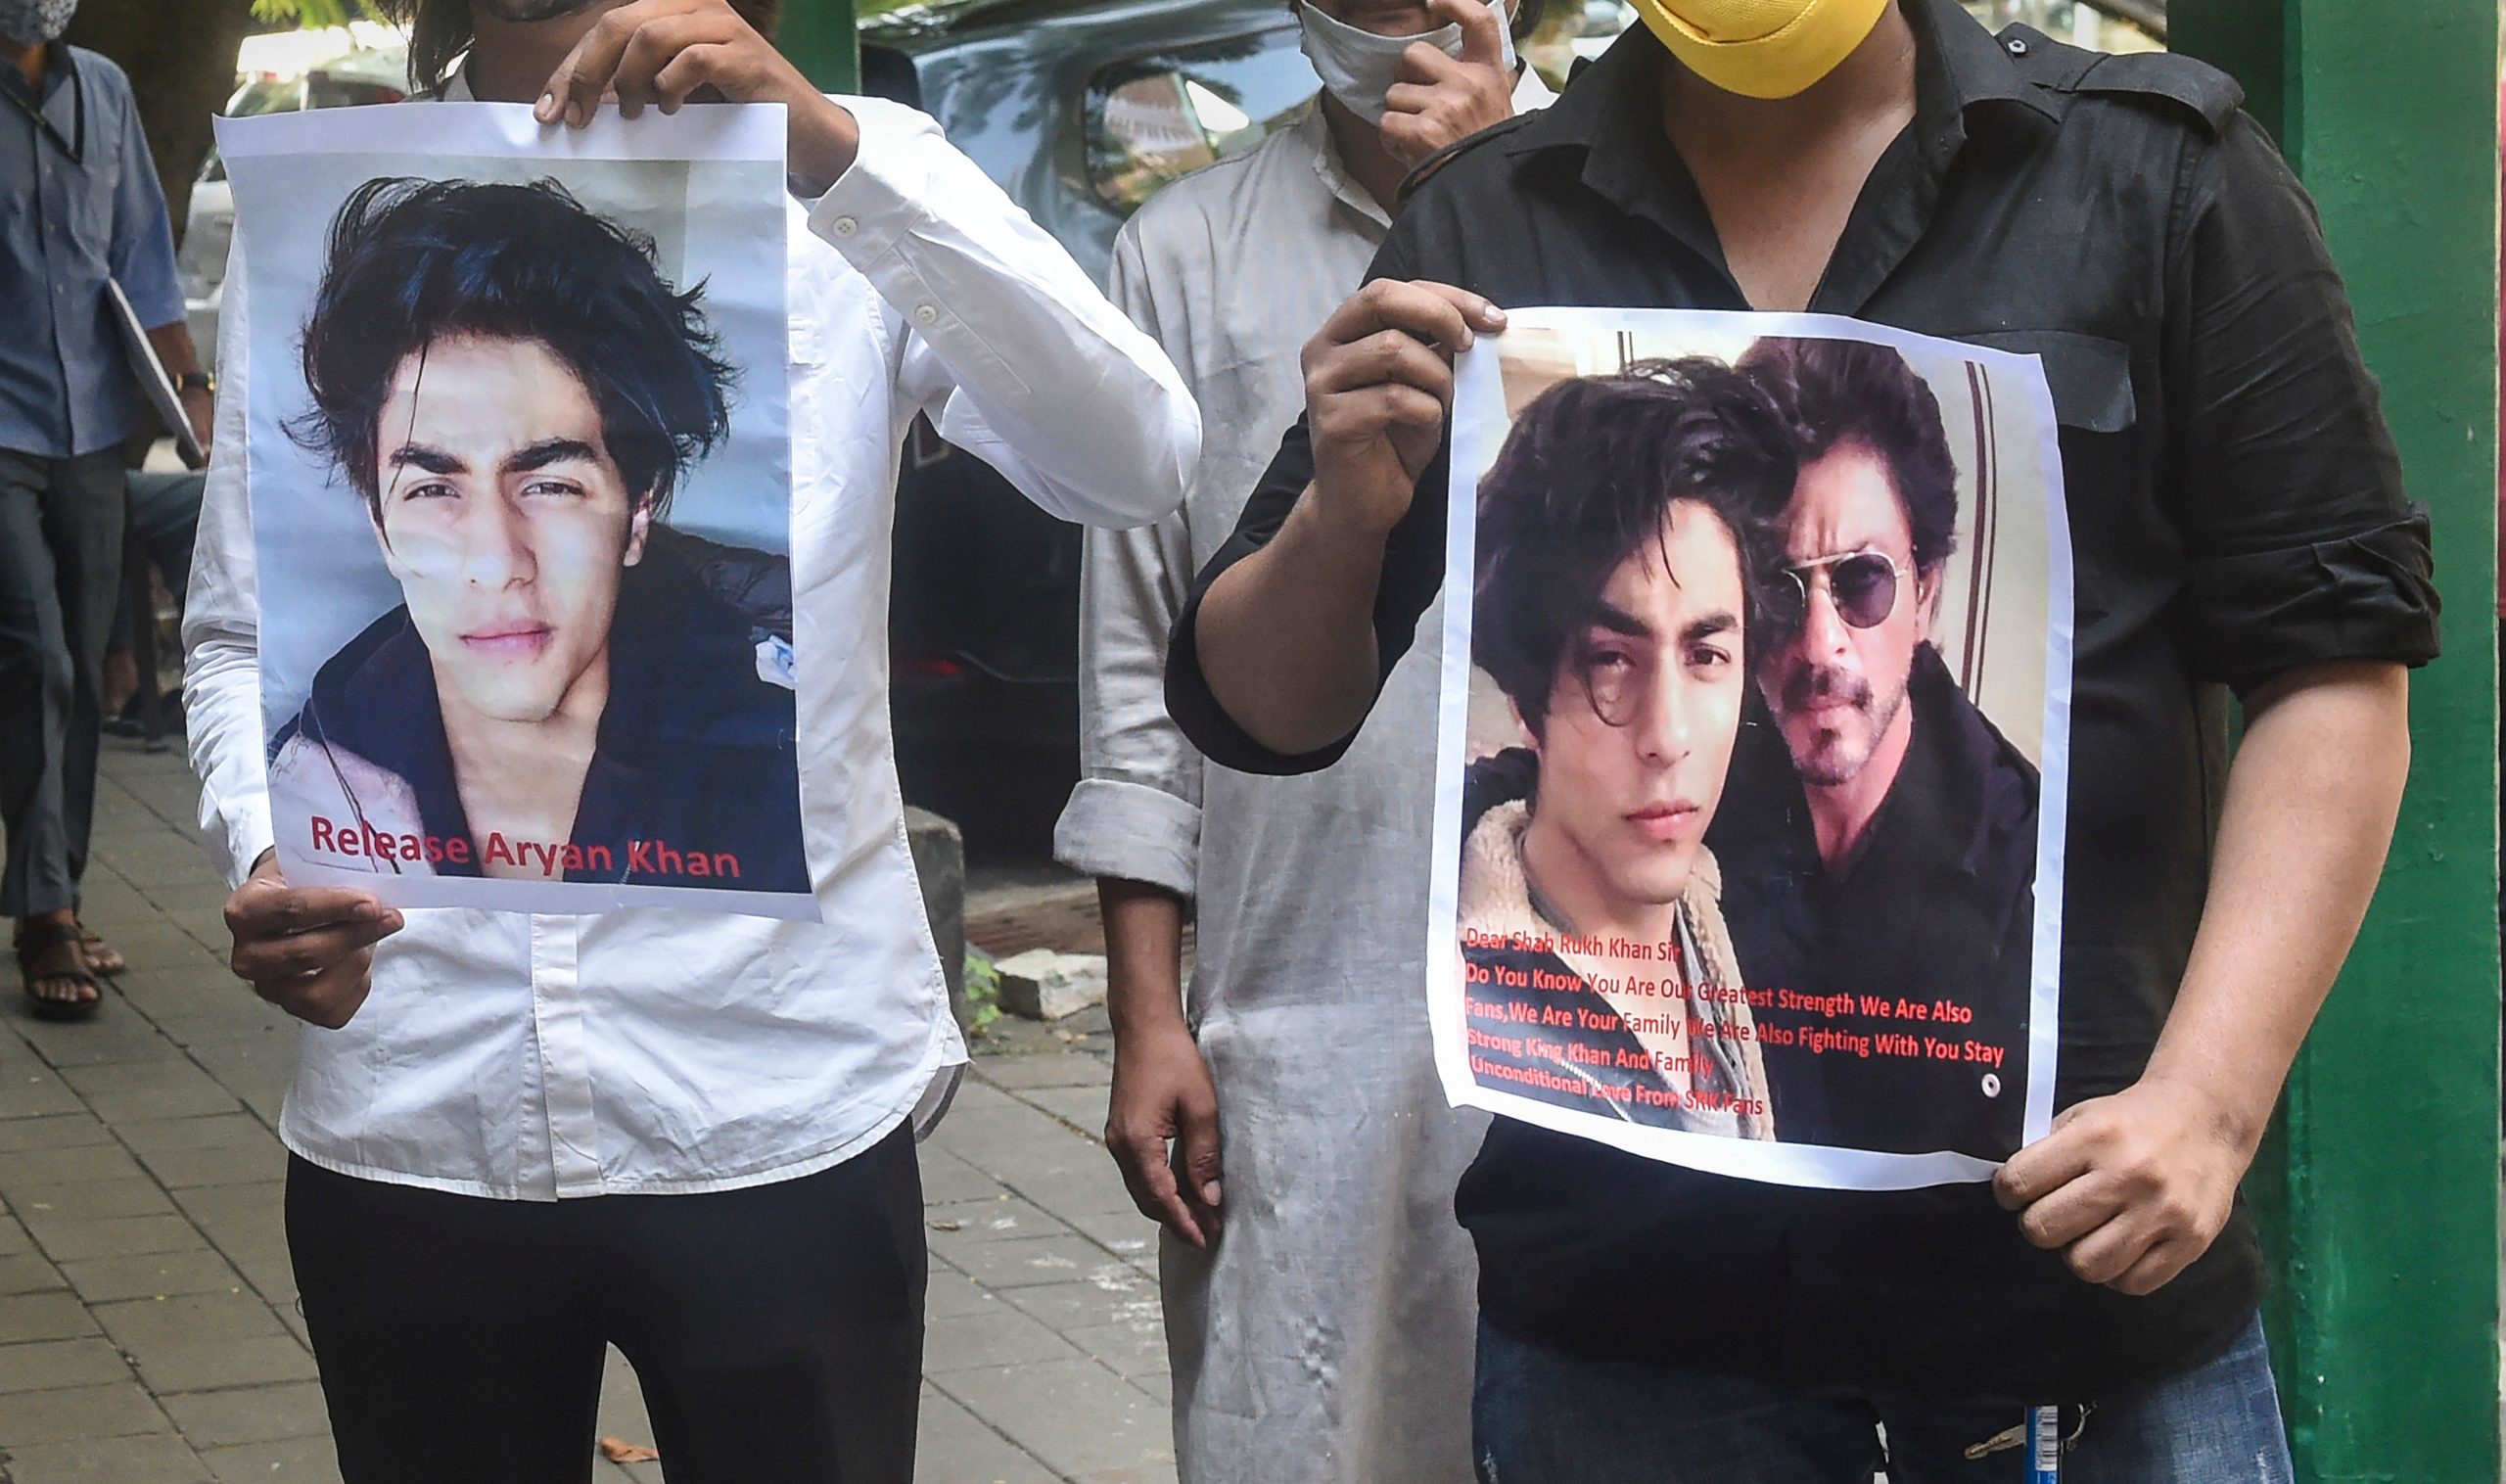 No evidence, no conspiracy: Arguments by Aryan Khan’s lawyers against his custody